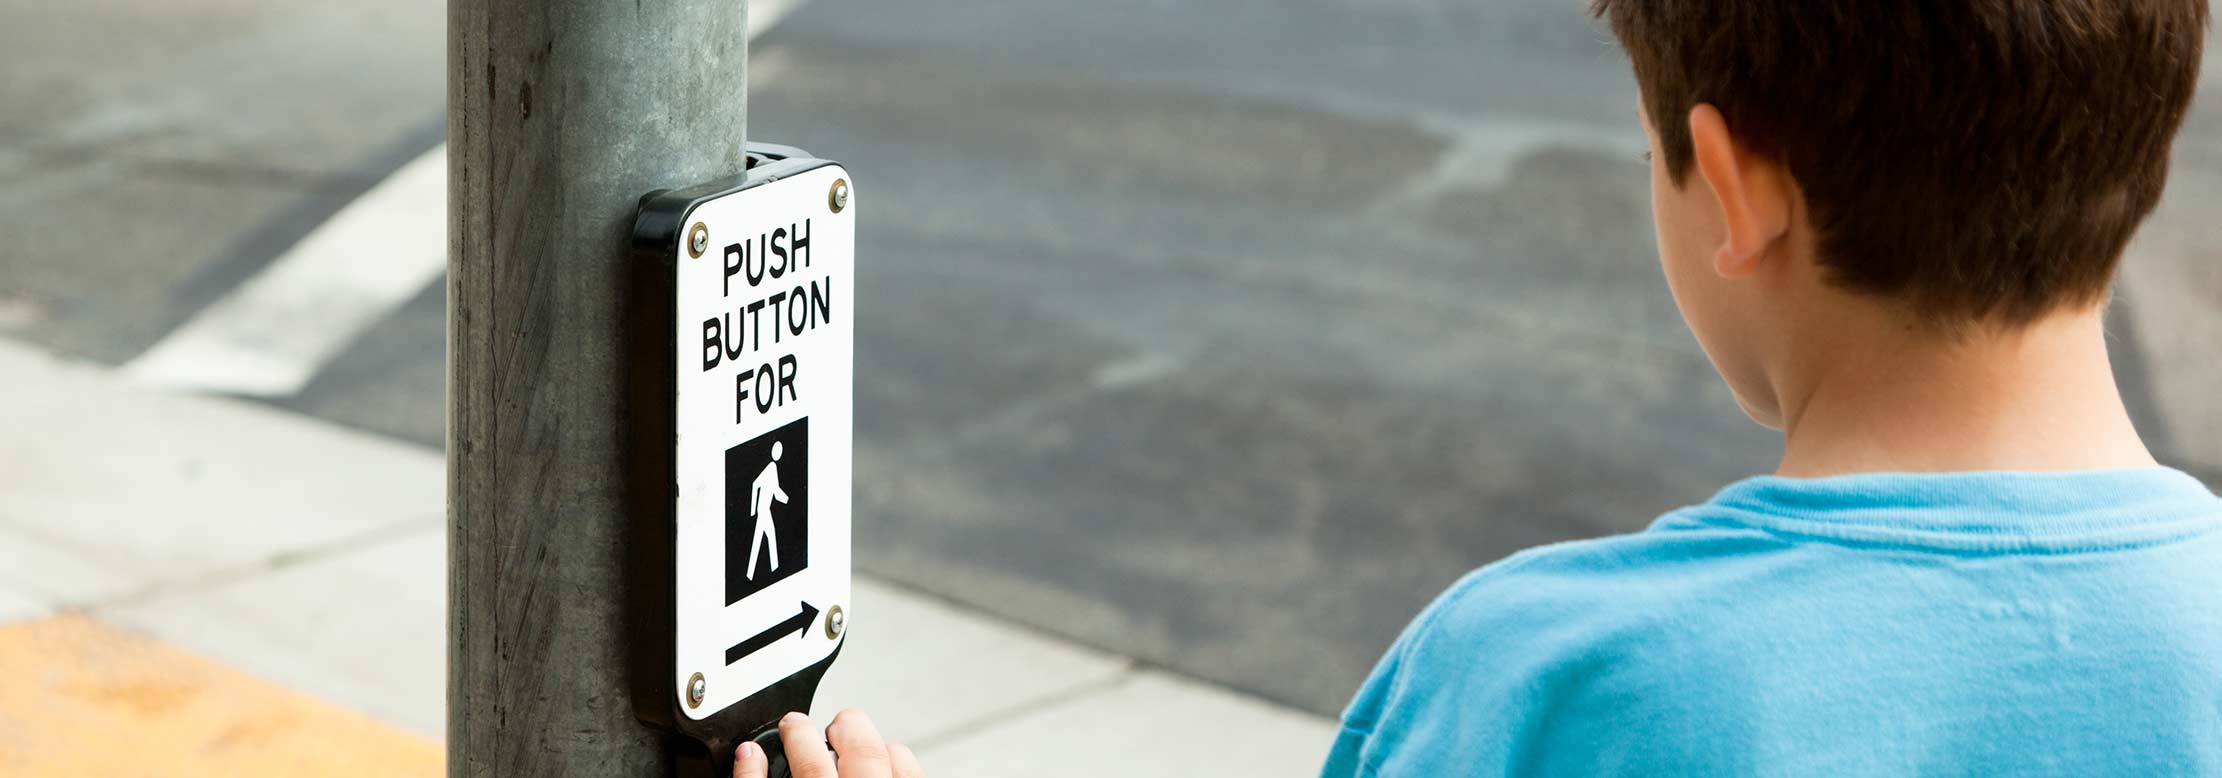 Young person pushes button to activate crosswalk light.